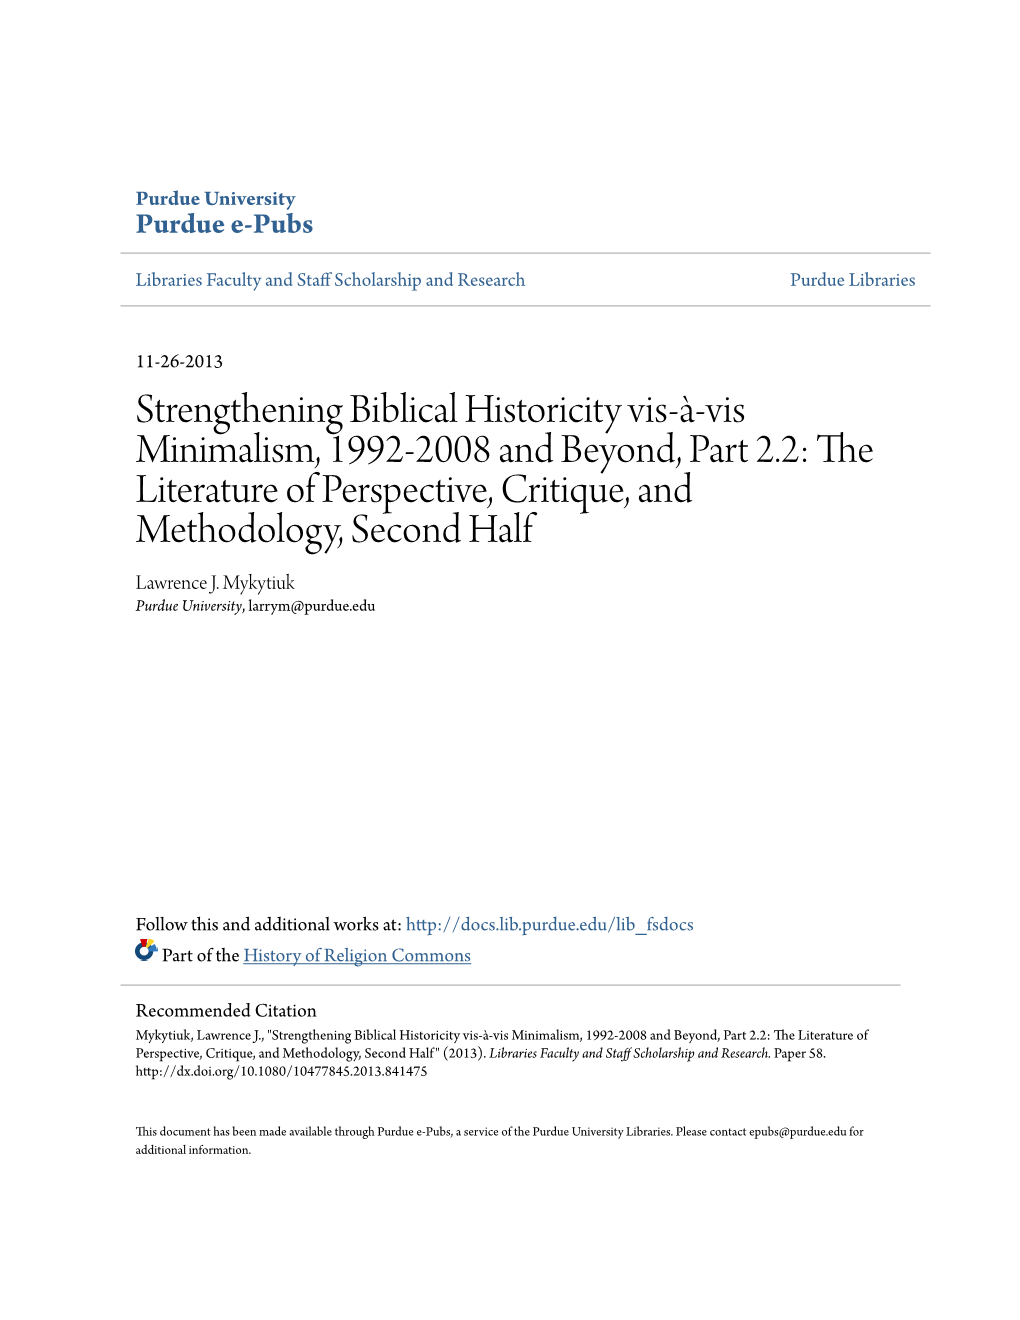 Strengthening Biblical Historicity Vis-À-Vis Minimalism, 1992-2008 and Beyond, Part 2.2: the Literature Of